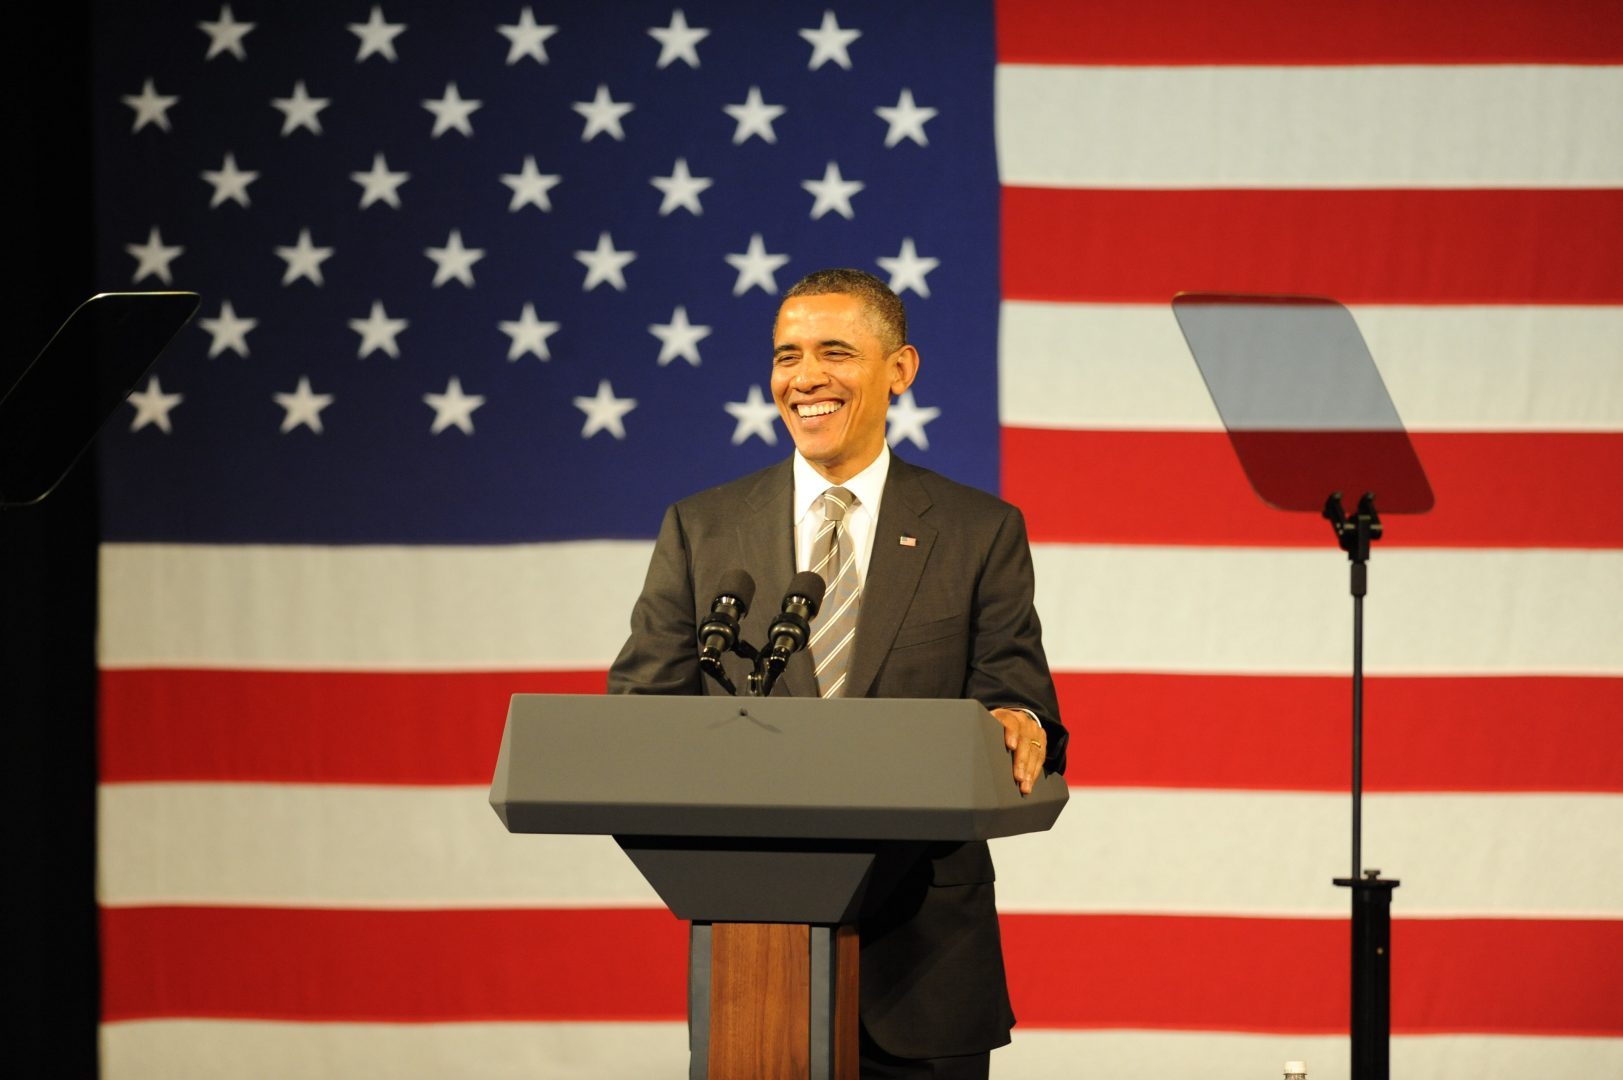 President Barack Obama standing at a podium with the American flag behind him